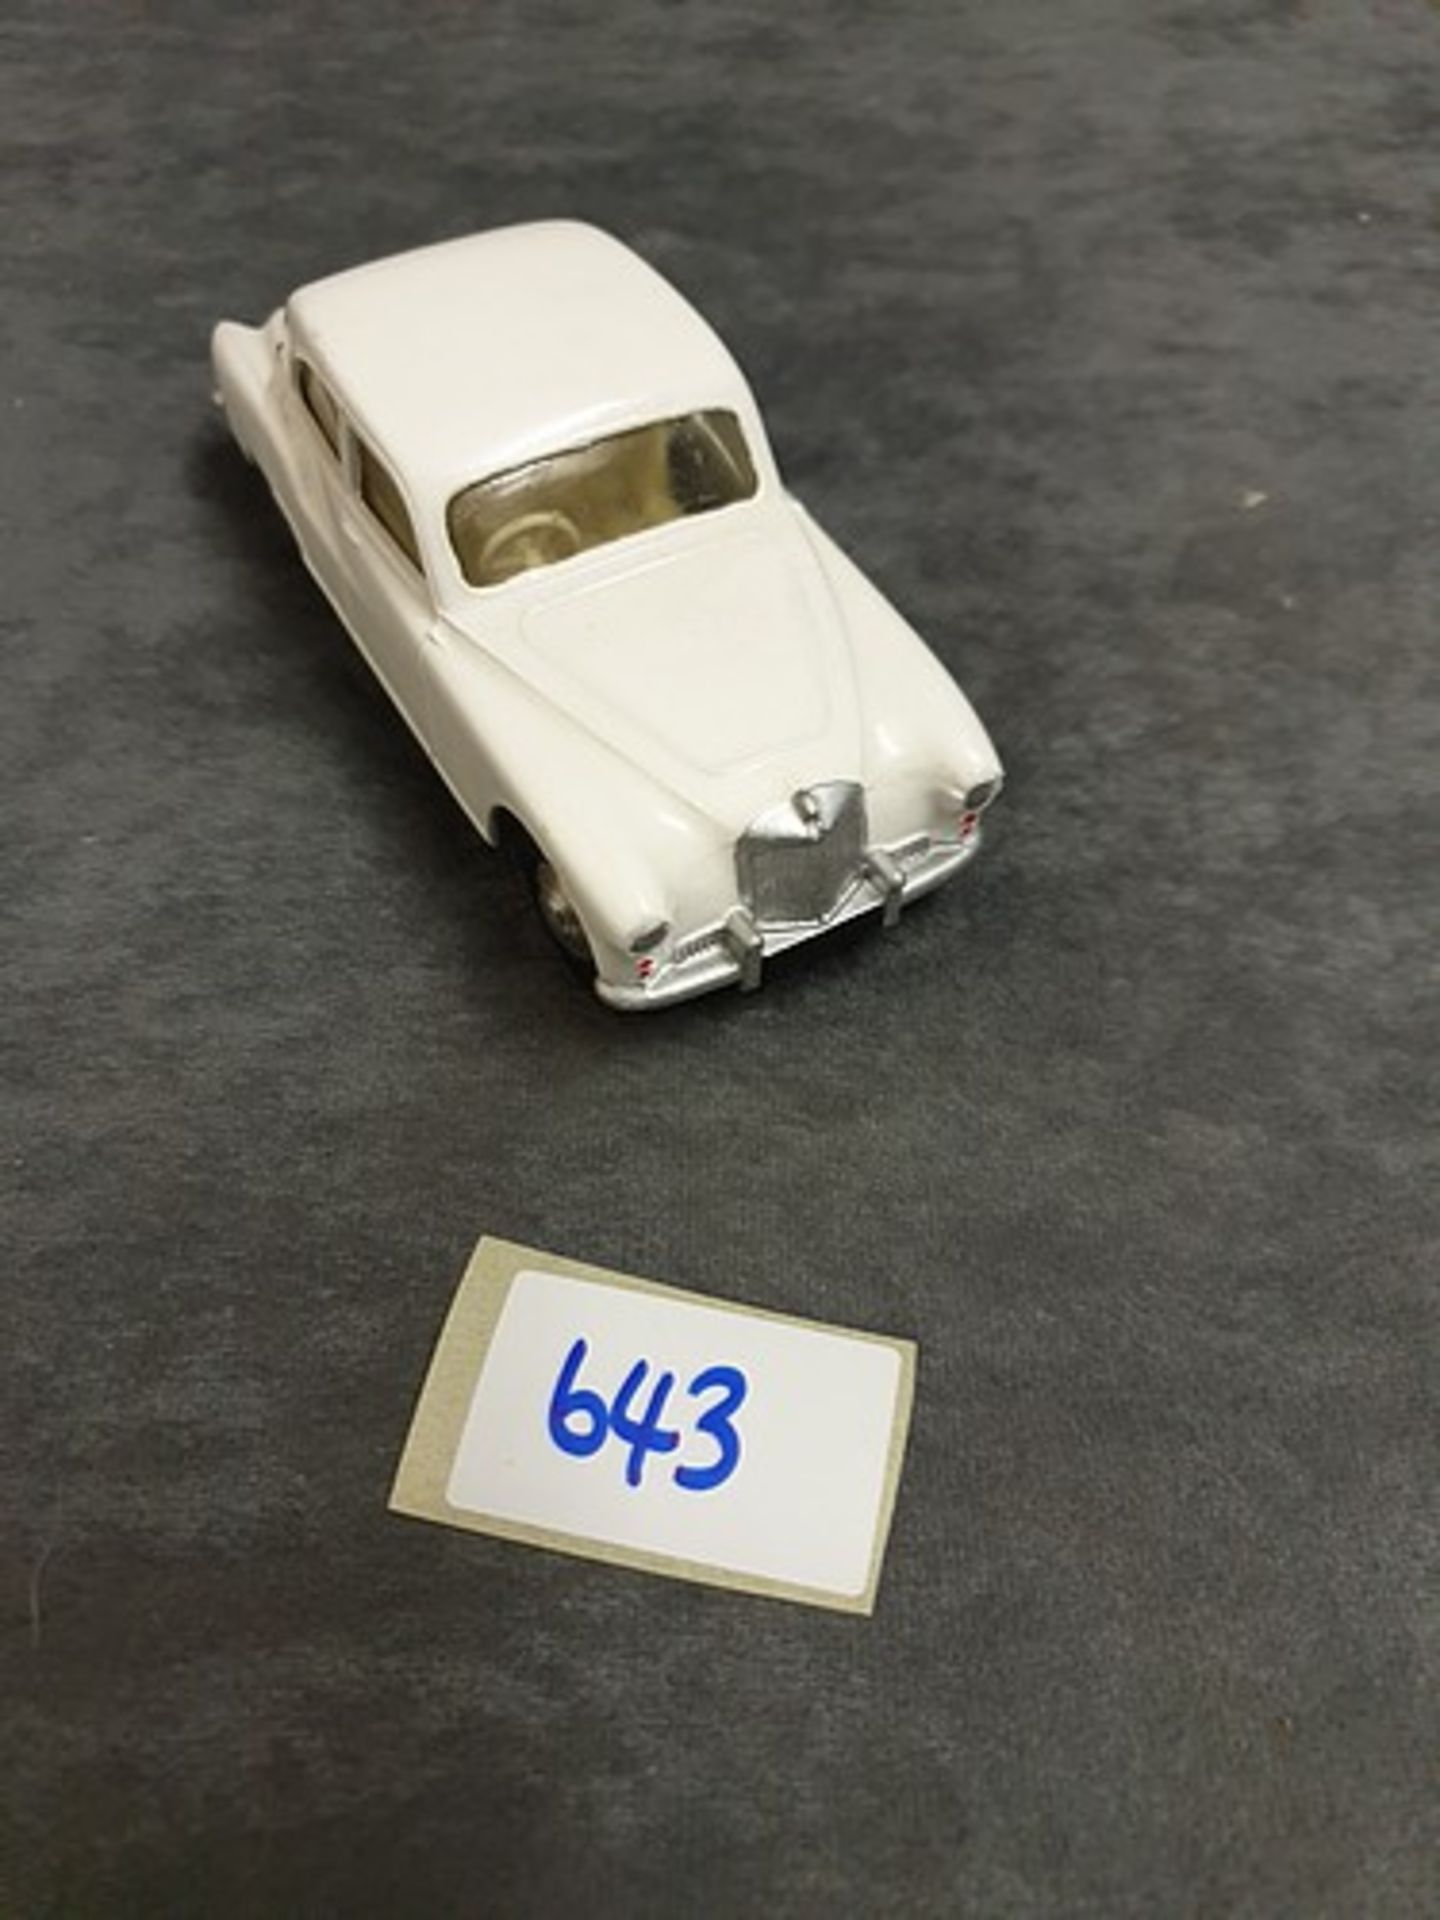 Spot-On By Tri-Ang Models Diecast #101 Armstrong Siddeley Sapphire In White And Cream Interior Model - Image 2 of 4